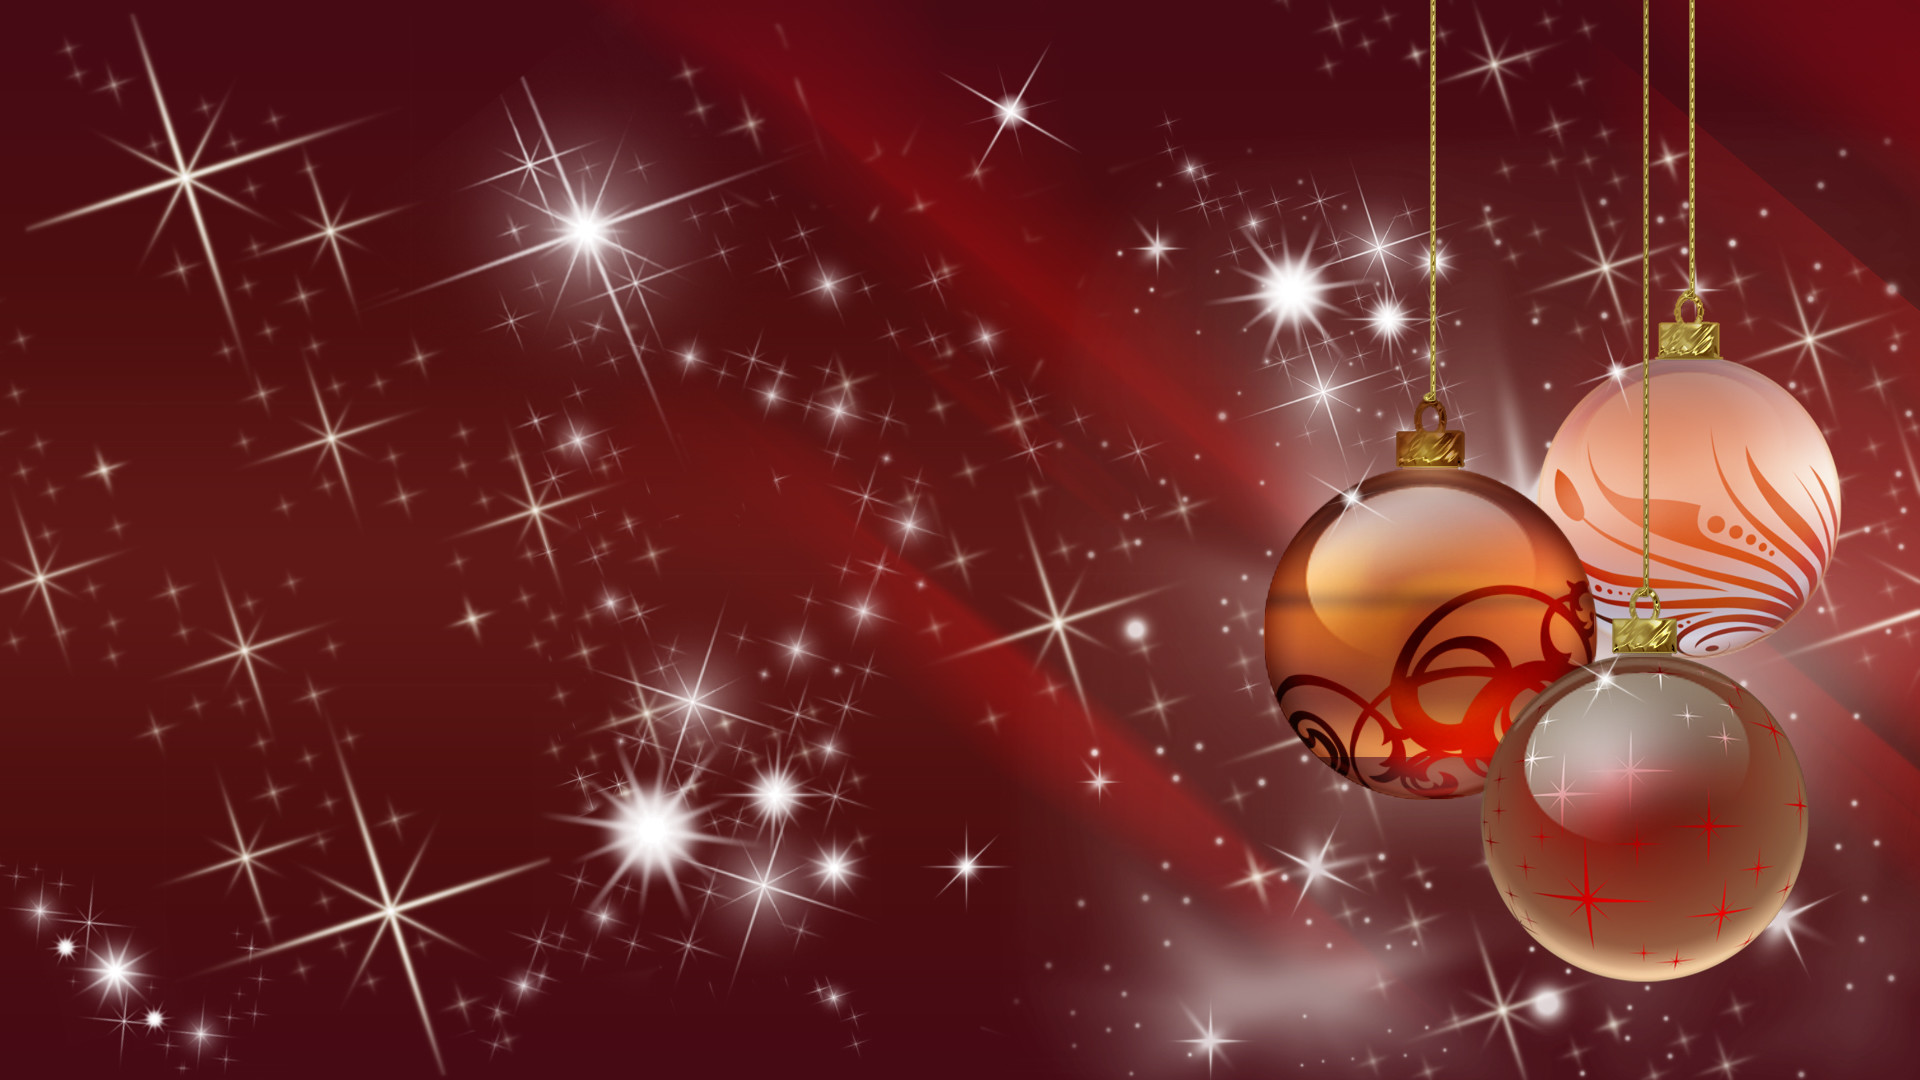 1920x1080 Christmas Backgrounds collection of wallpapers available for free download.  Decorate your computer desktop backgrounds with